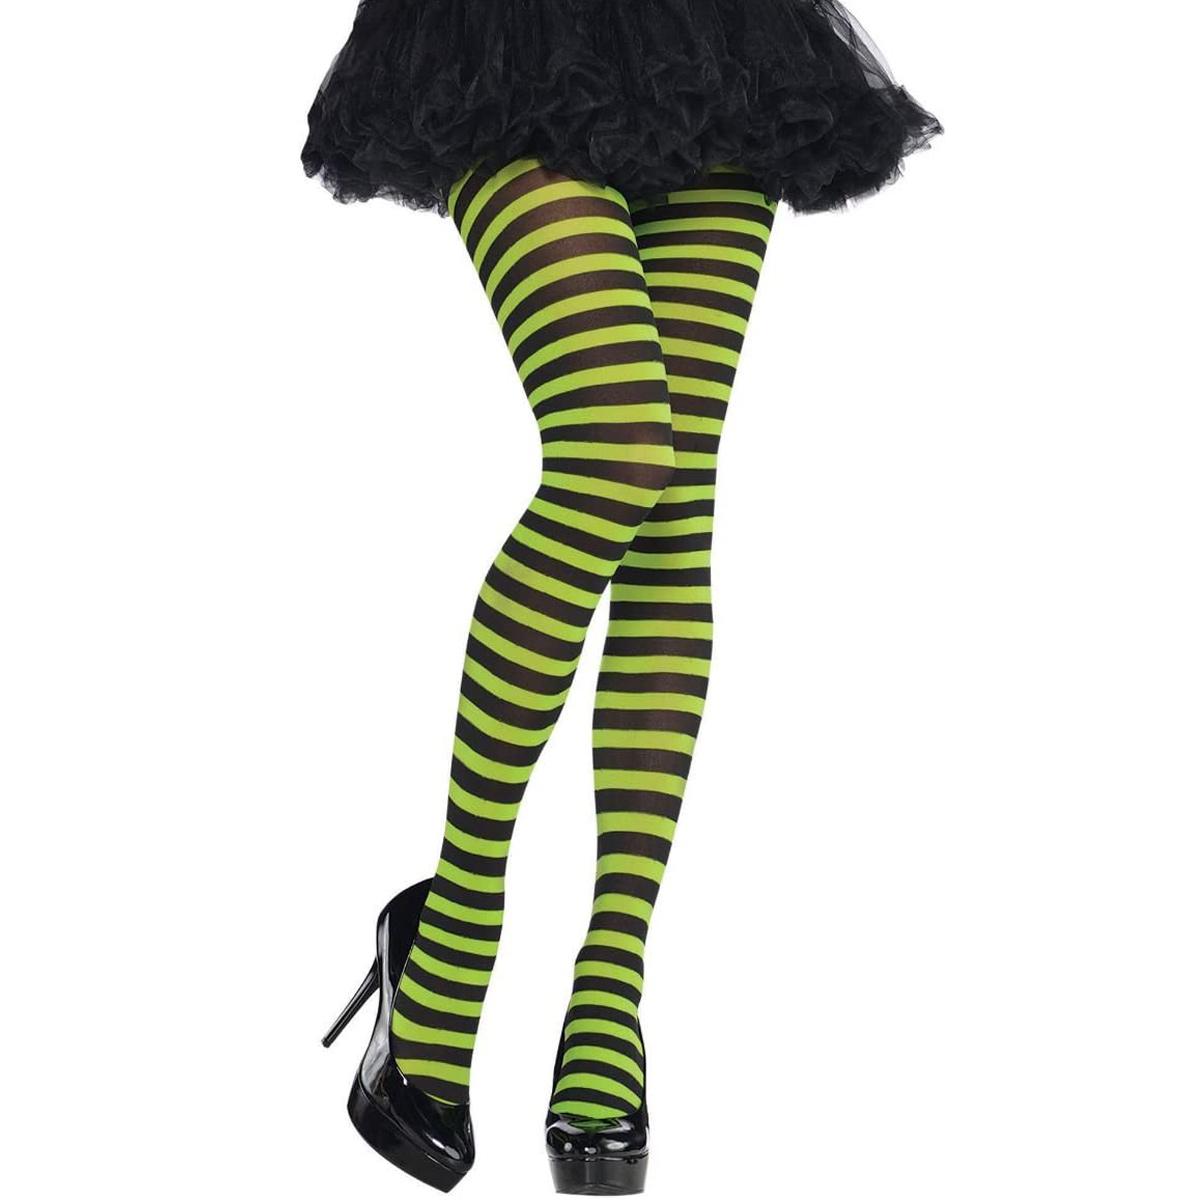 Adult Green & Black Striped Tights Standard Costumes & Apparel - Party Centre